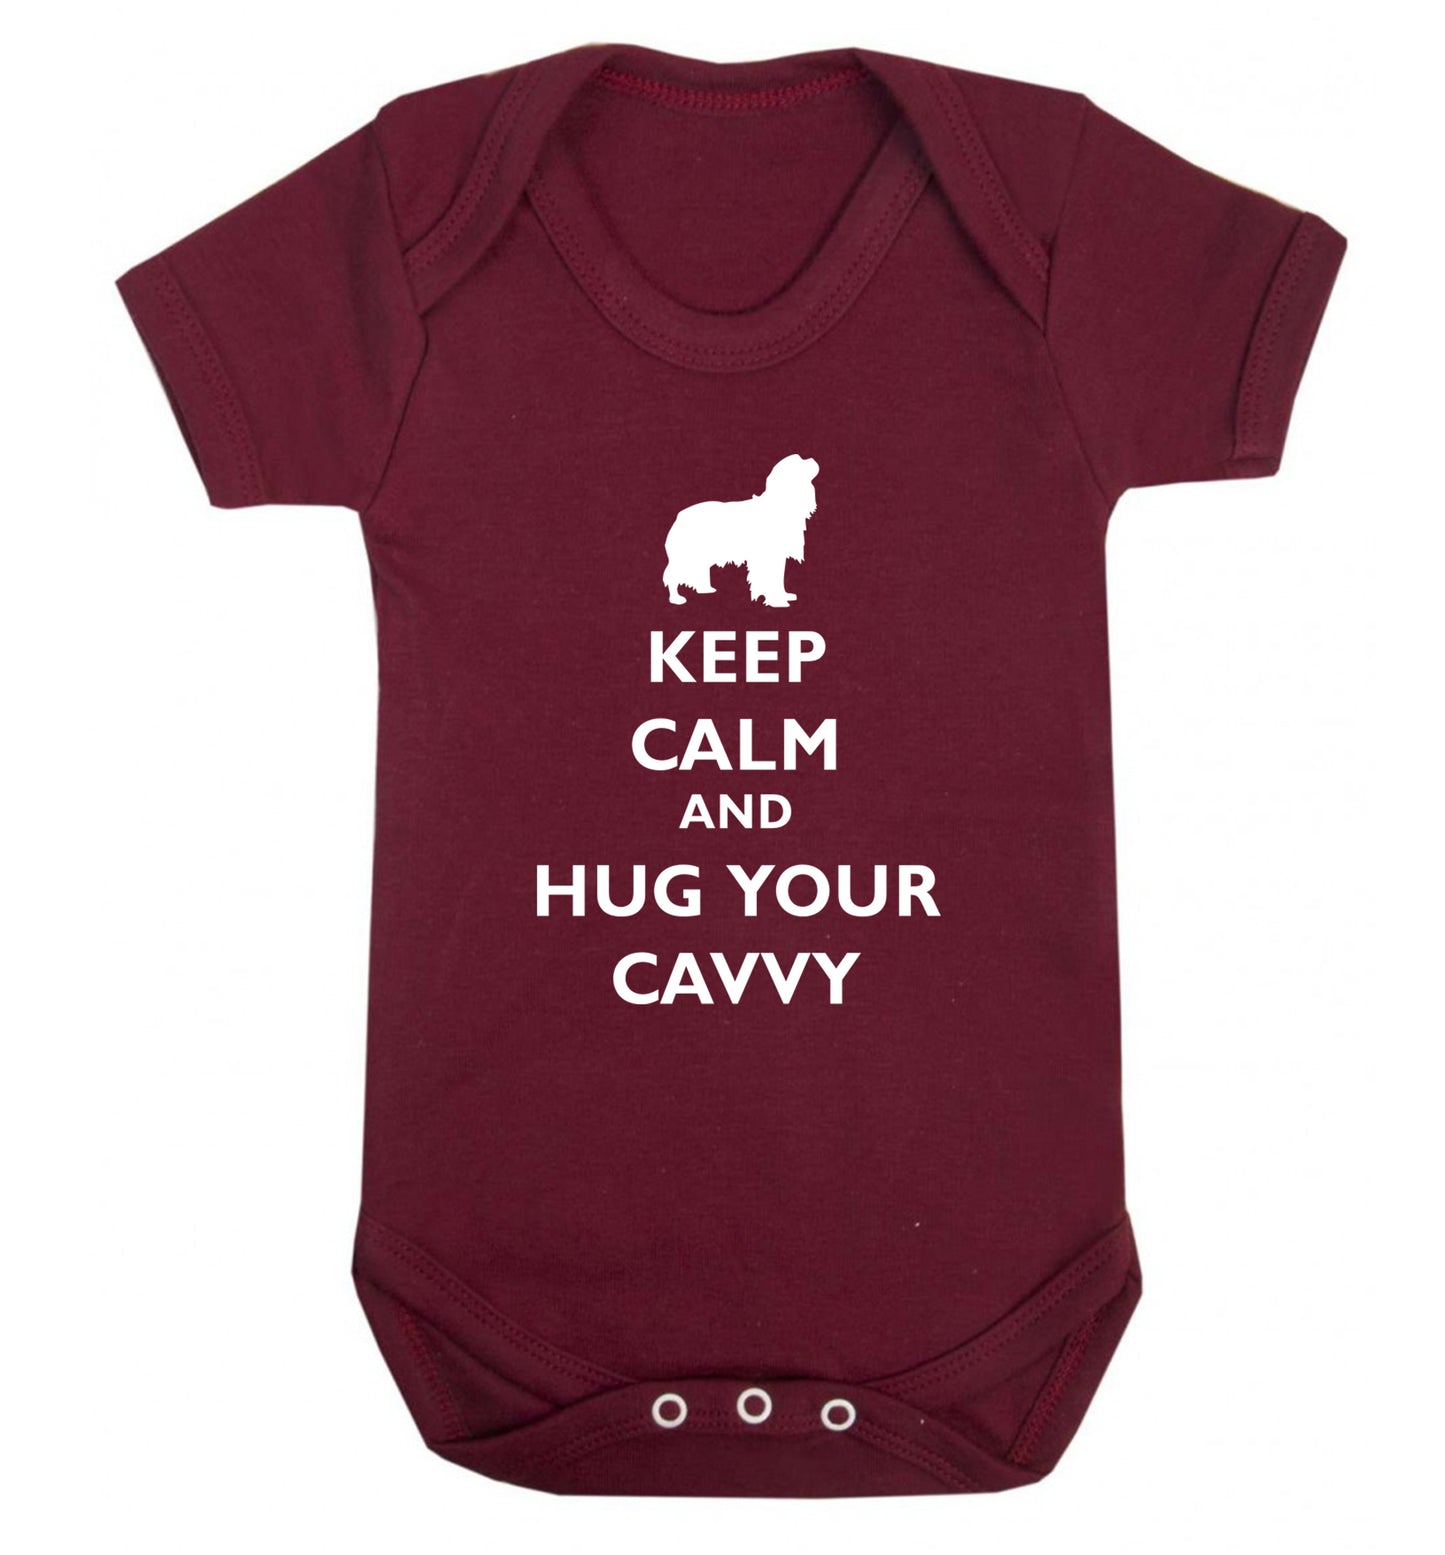 Keep calm and hug your cavvy Baby Vest maroon 18-24 months